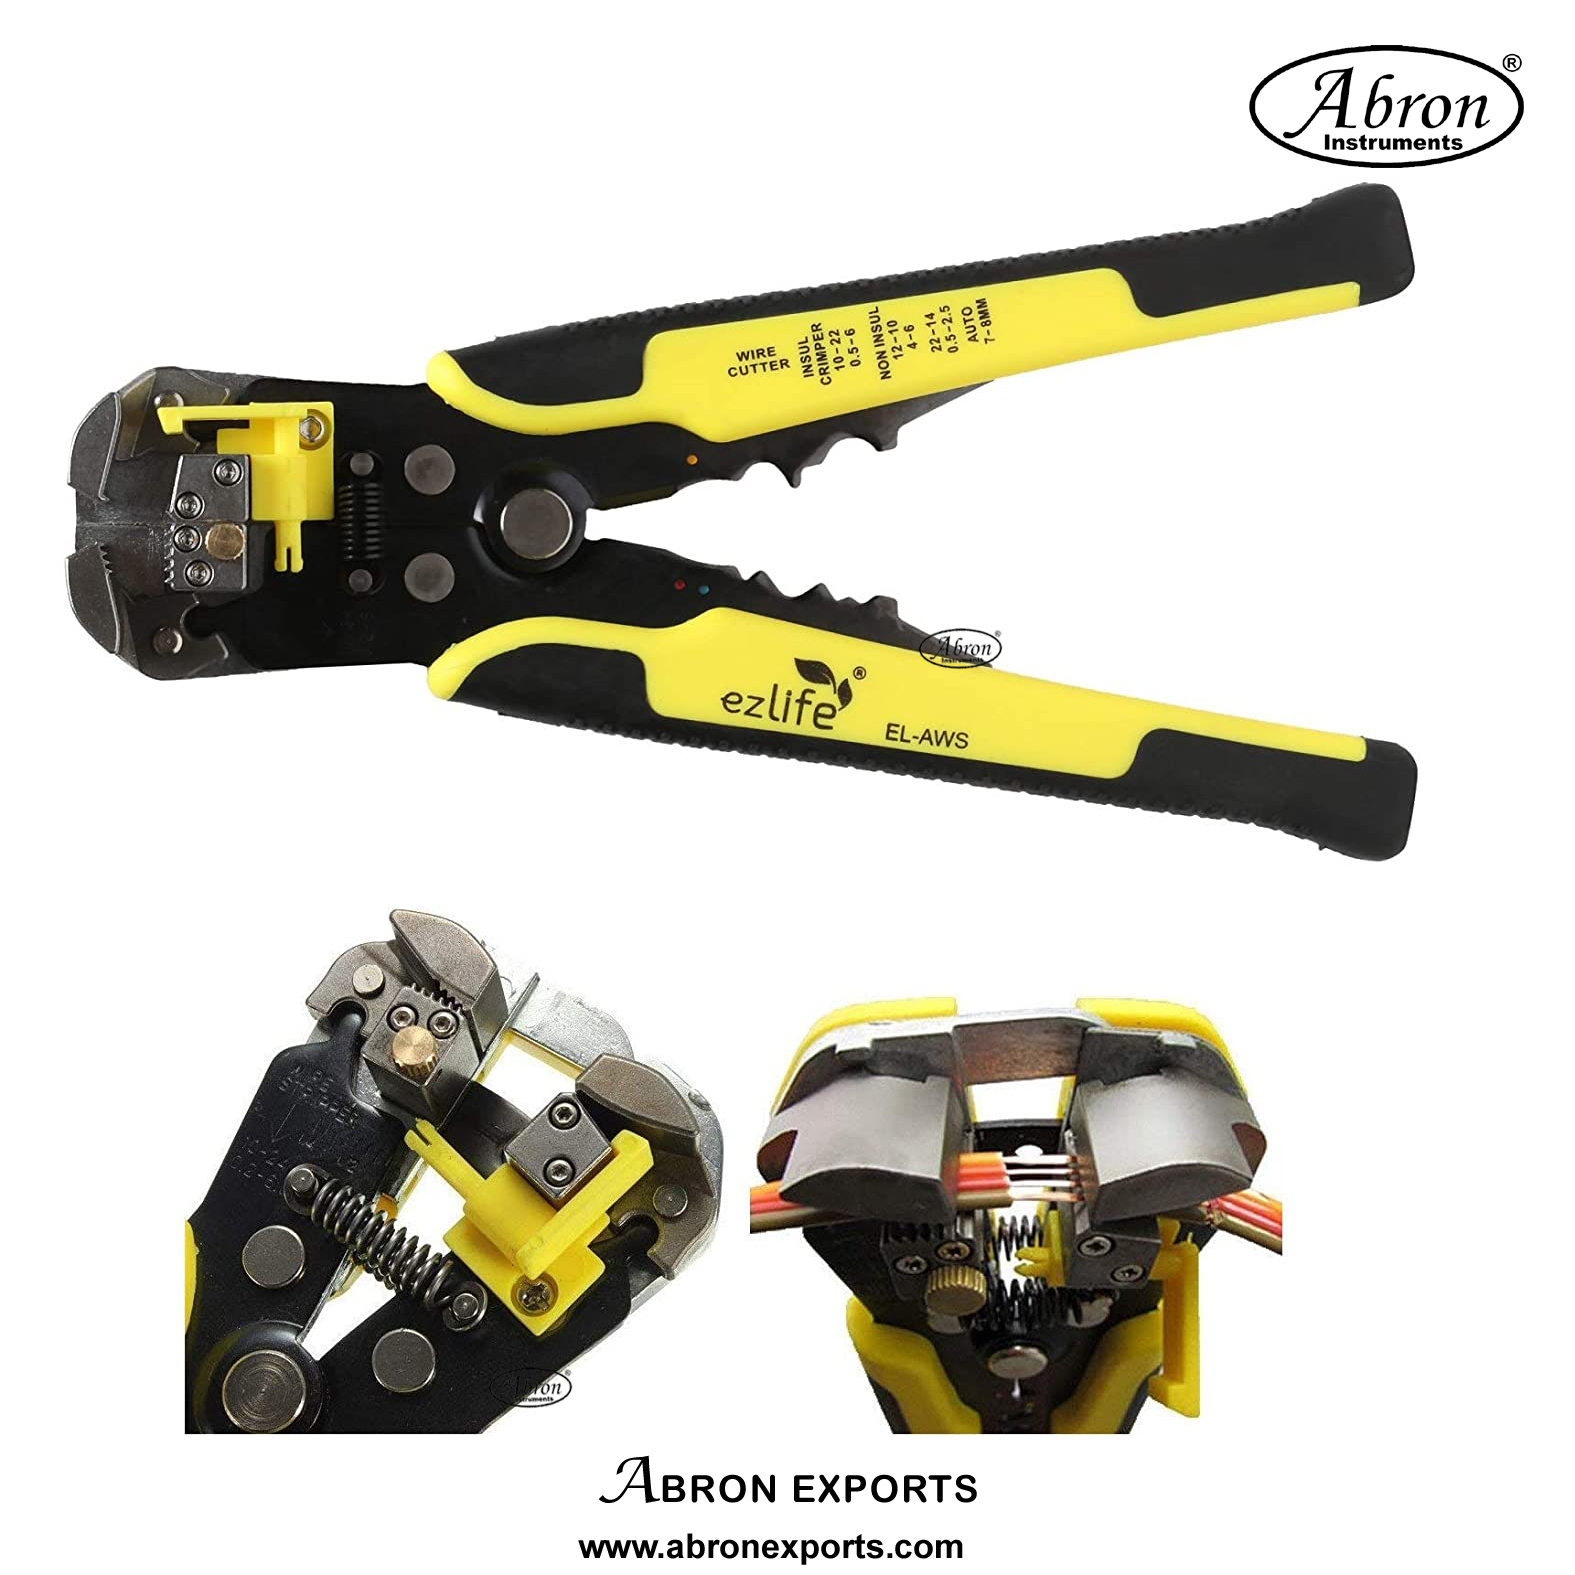 Cable Automatic Cutter Crimper Connector wire Multipurpose Tool 5 in1 Stripping Pliers Abron AE-1224W 